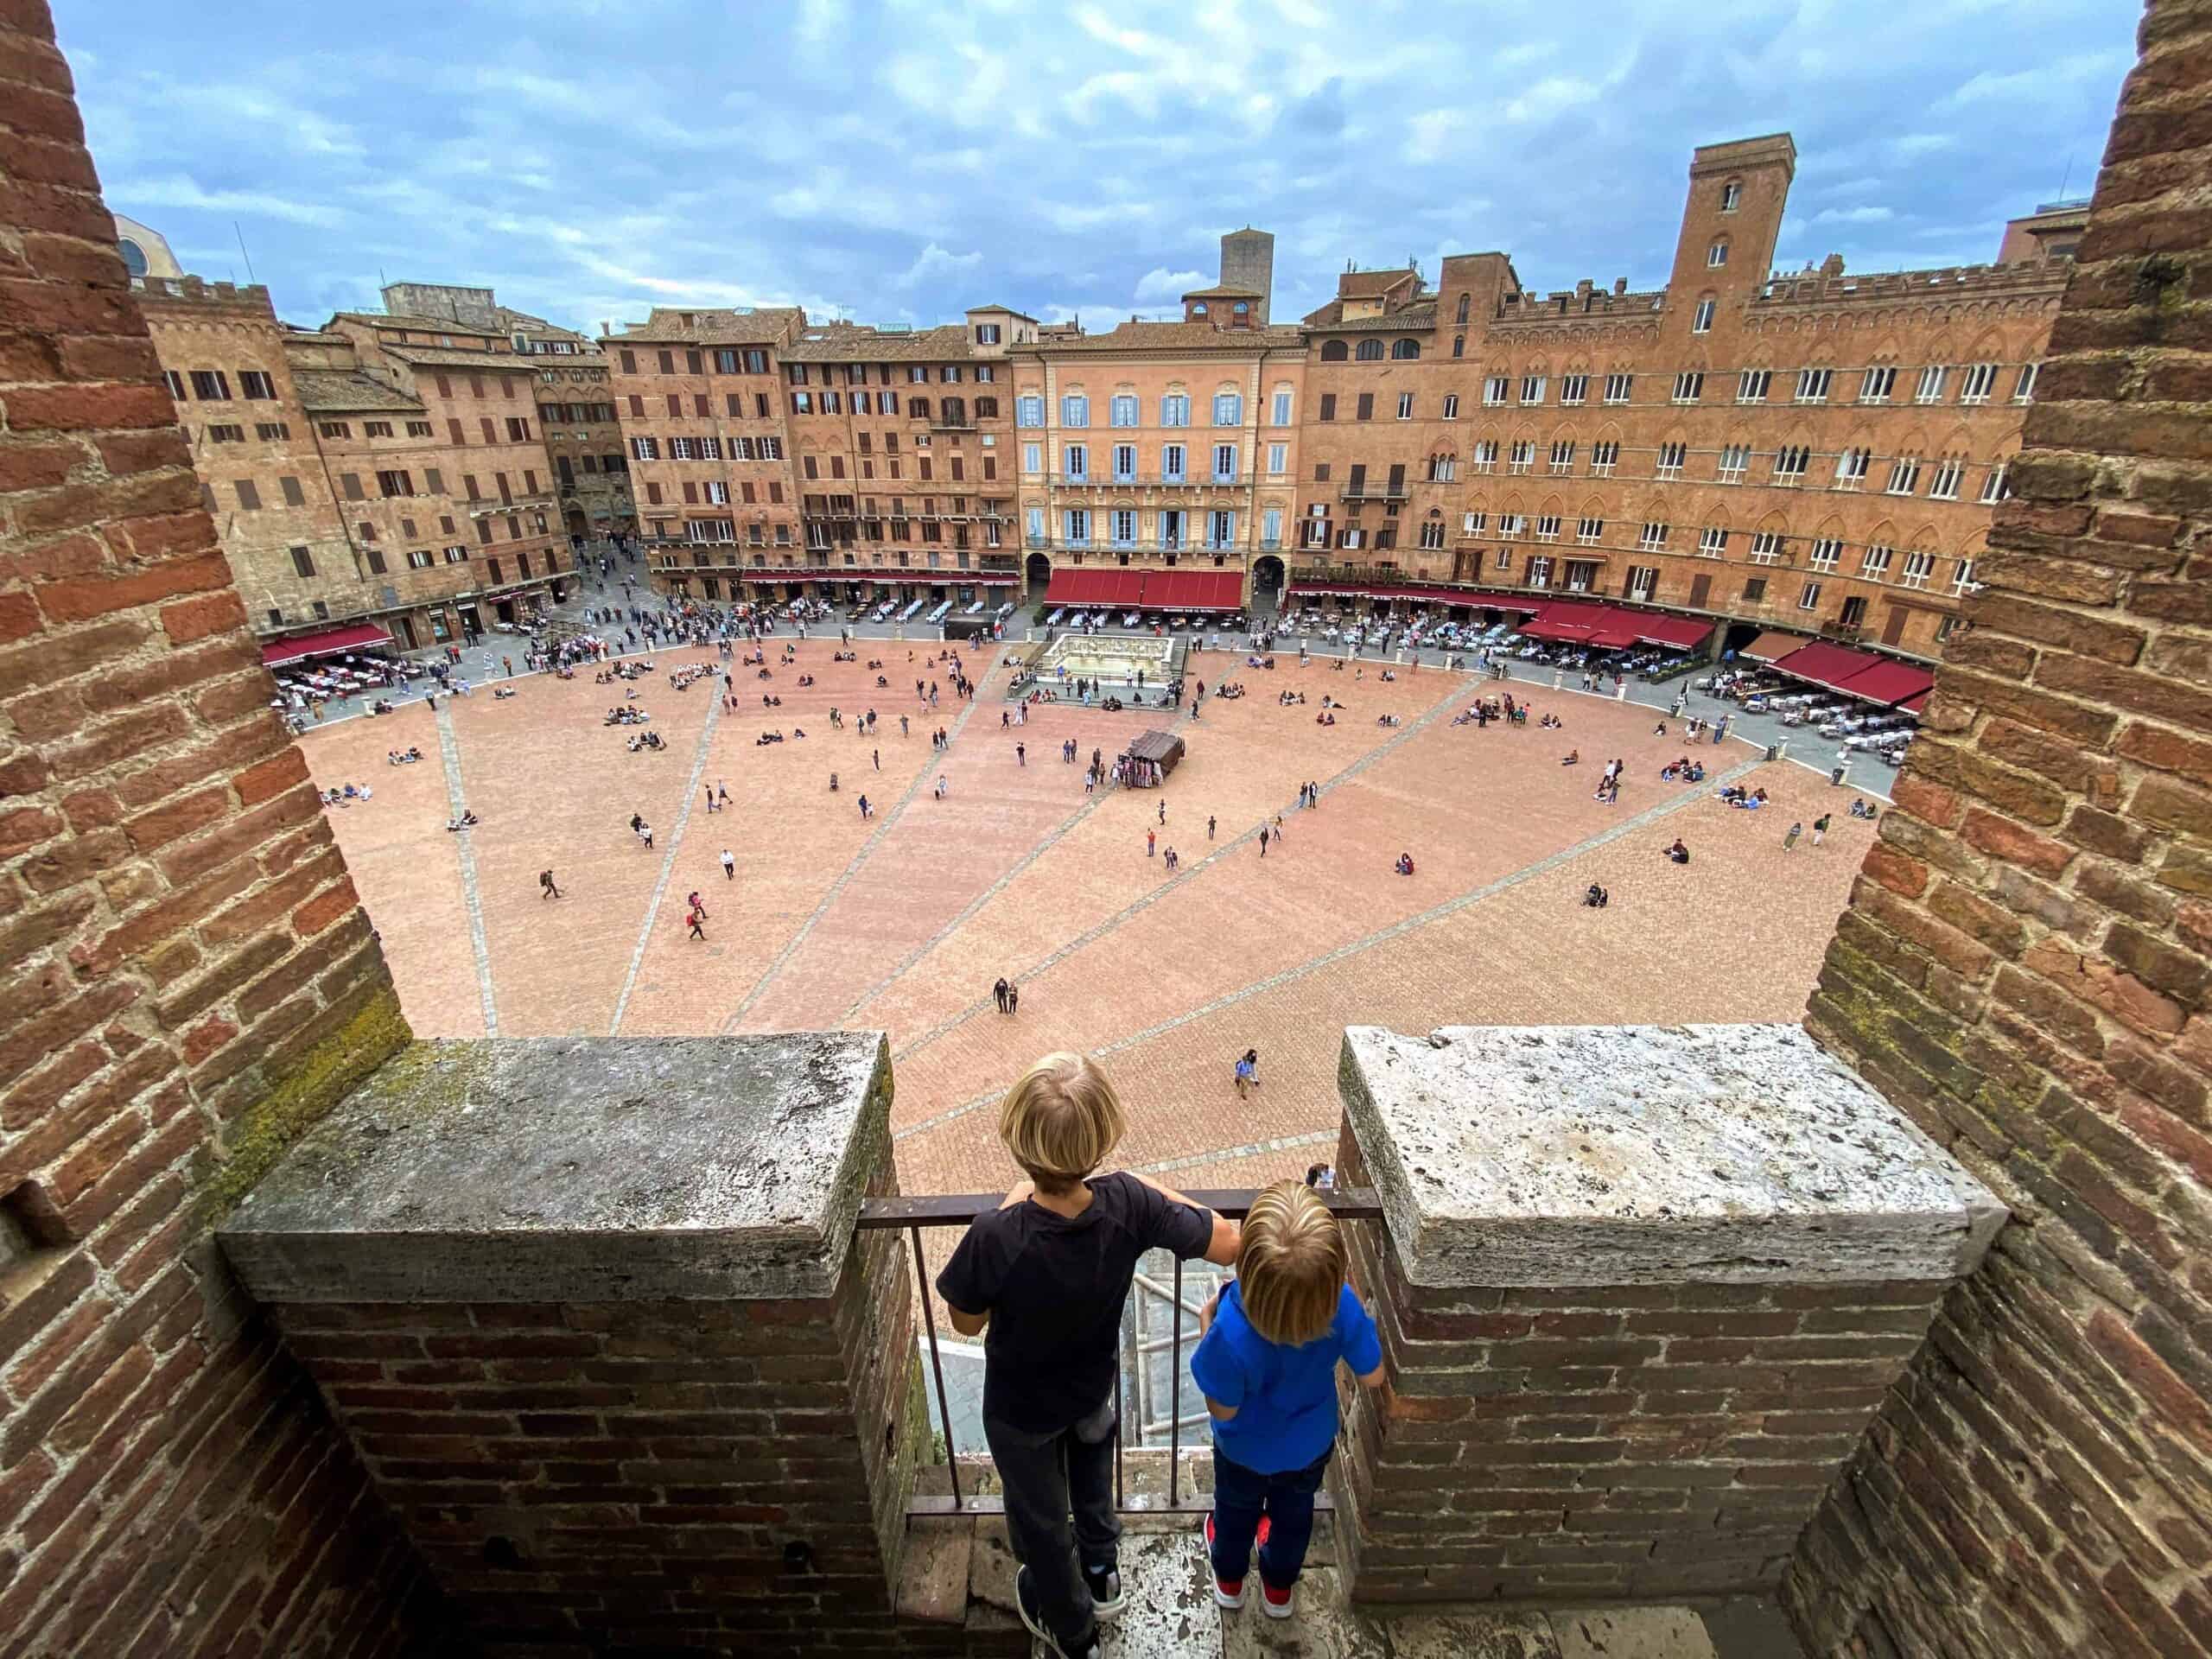 Checking out the view of Piazza del Campo from the clock tower.